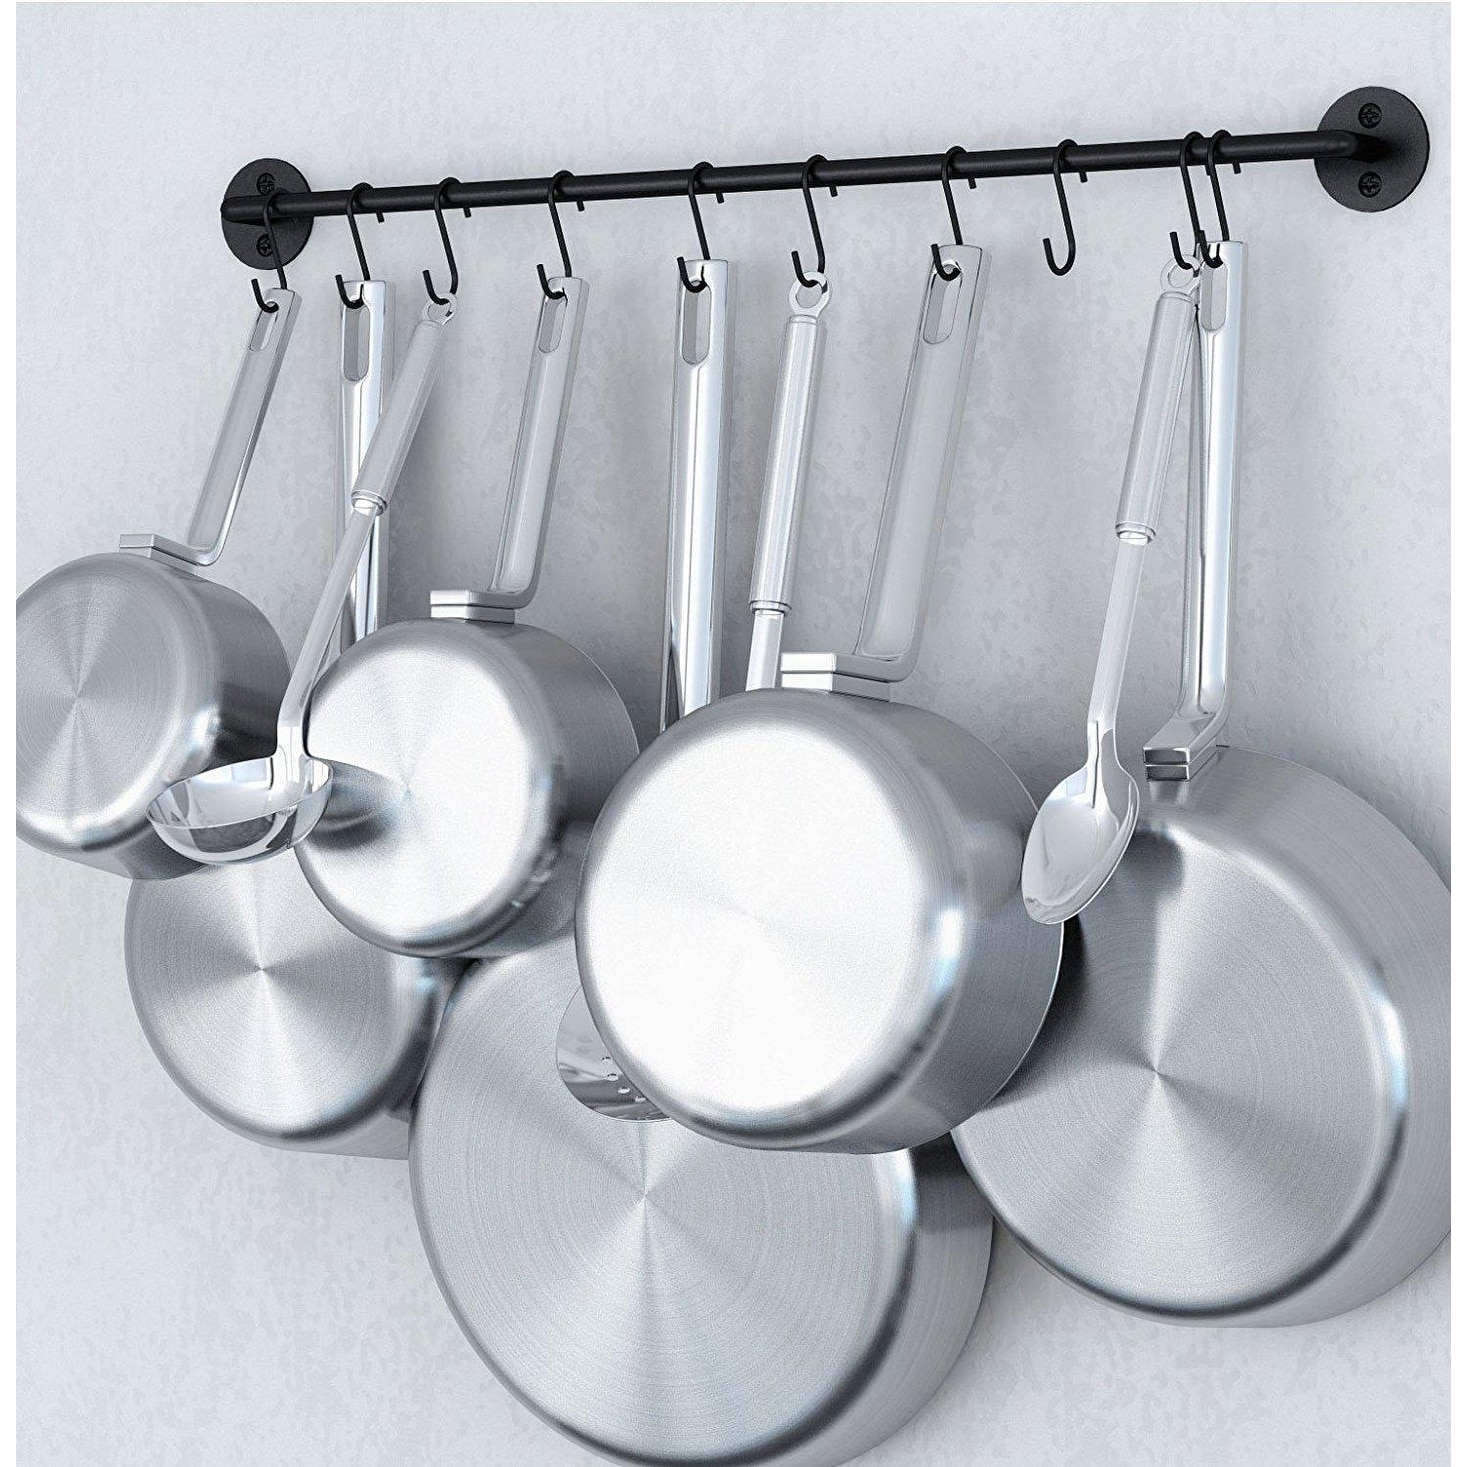 https://ak1.ostkcdn.com/images/products/is/images/direct/2e9bcb0f6664e231b30f1bc6396261bd7c8714ca/Wallniture-Cucina-Steel-24%27%27-Wall-Mounted-Kitchen-Rail-with-10-Hooks%2C-Black.jpg